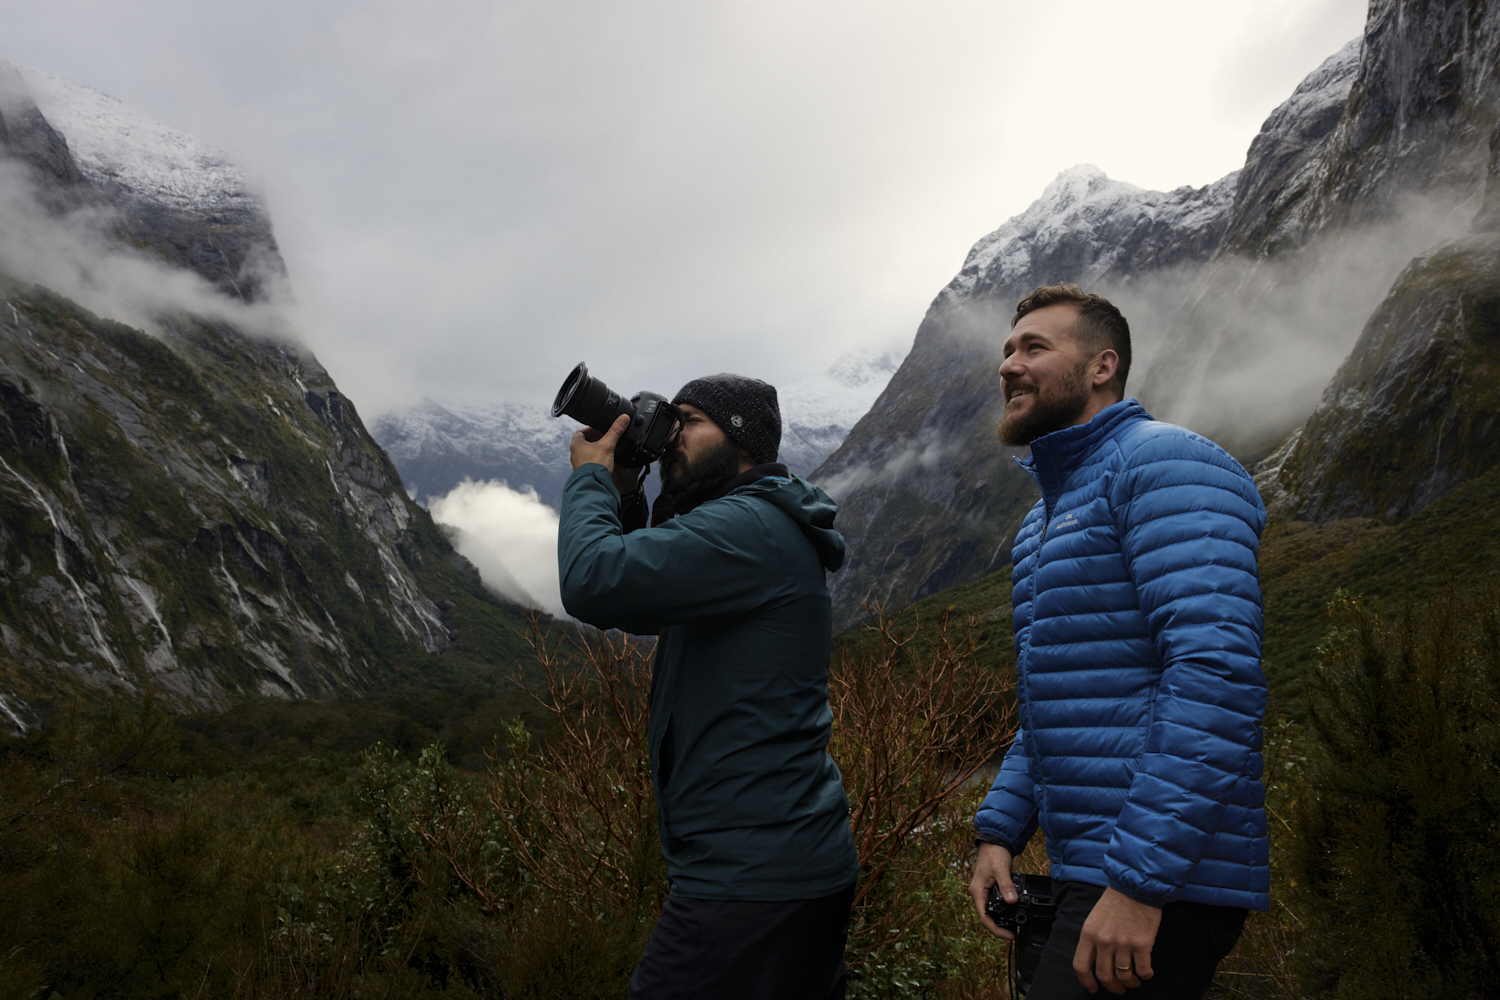 Fiordland and Te Anau photography workshop with William Patino